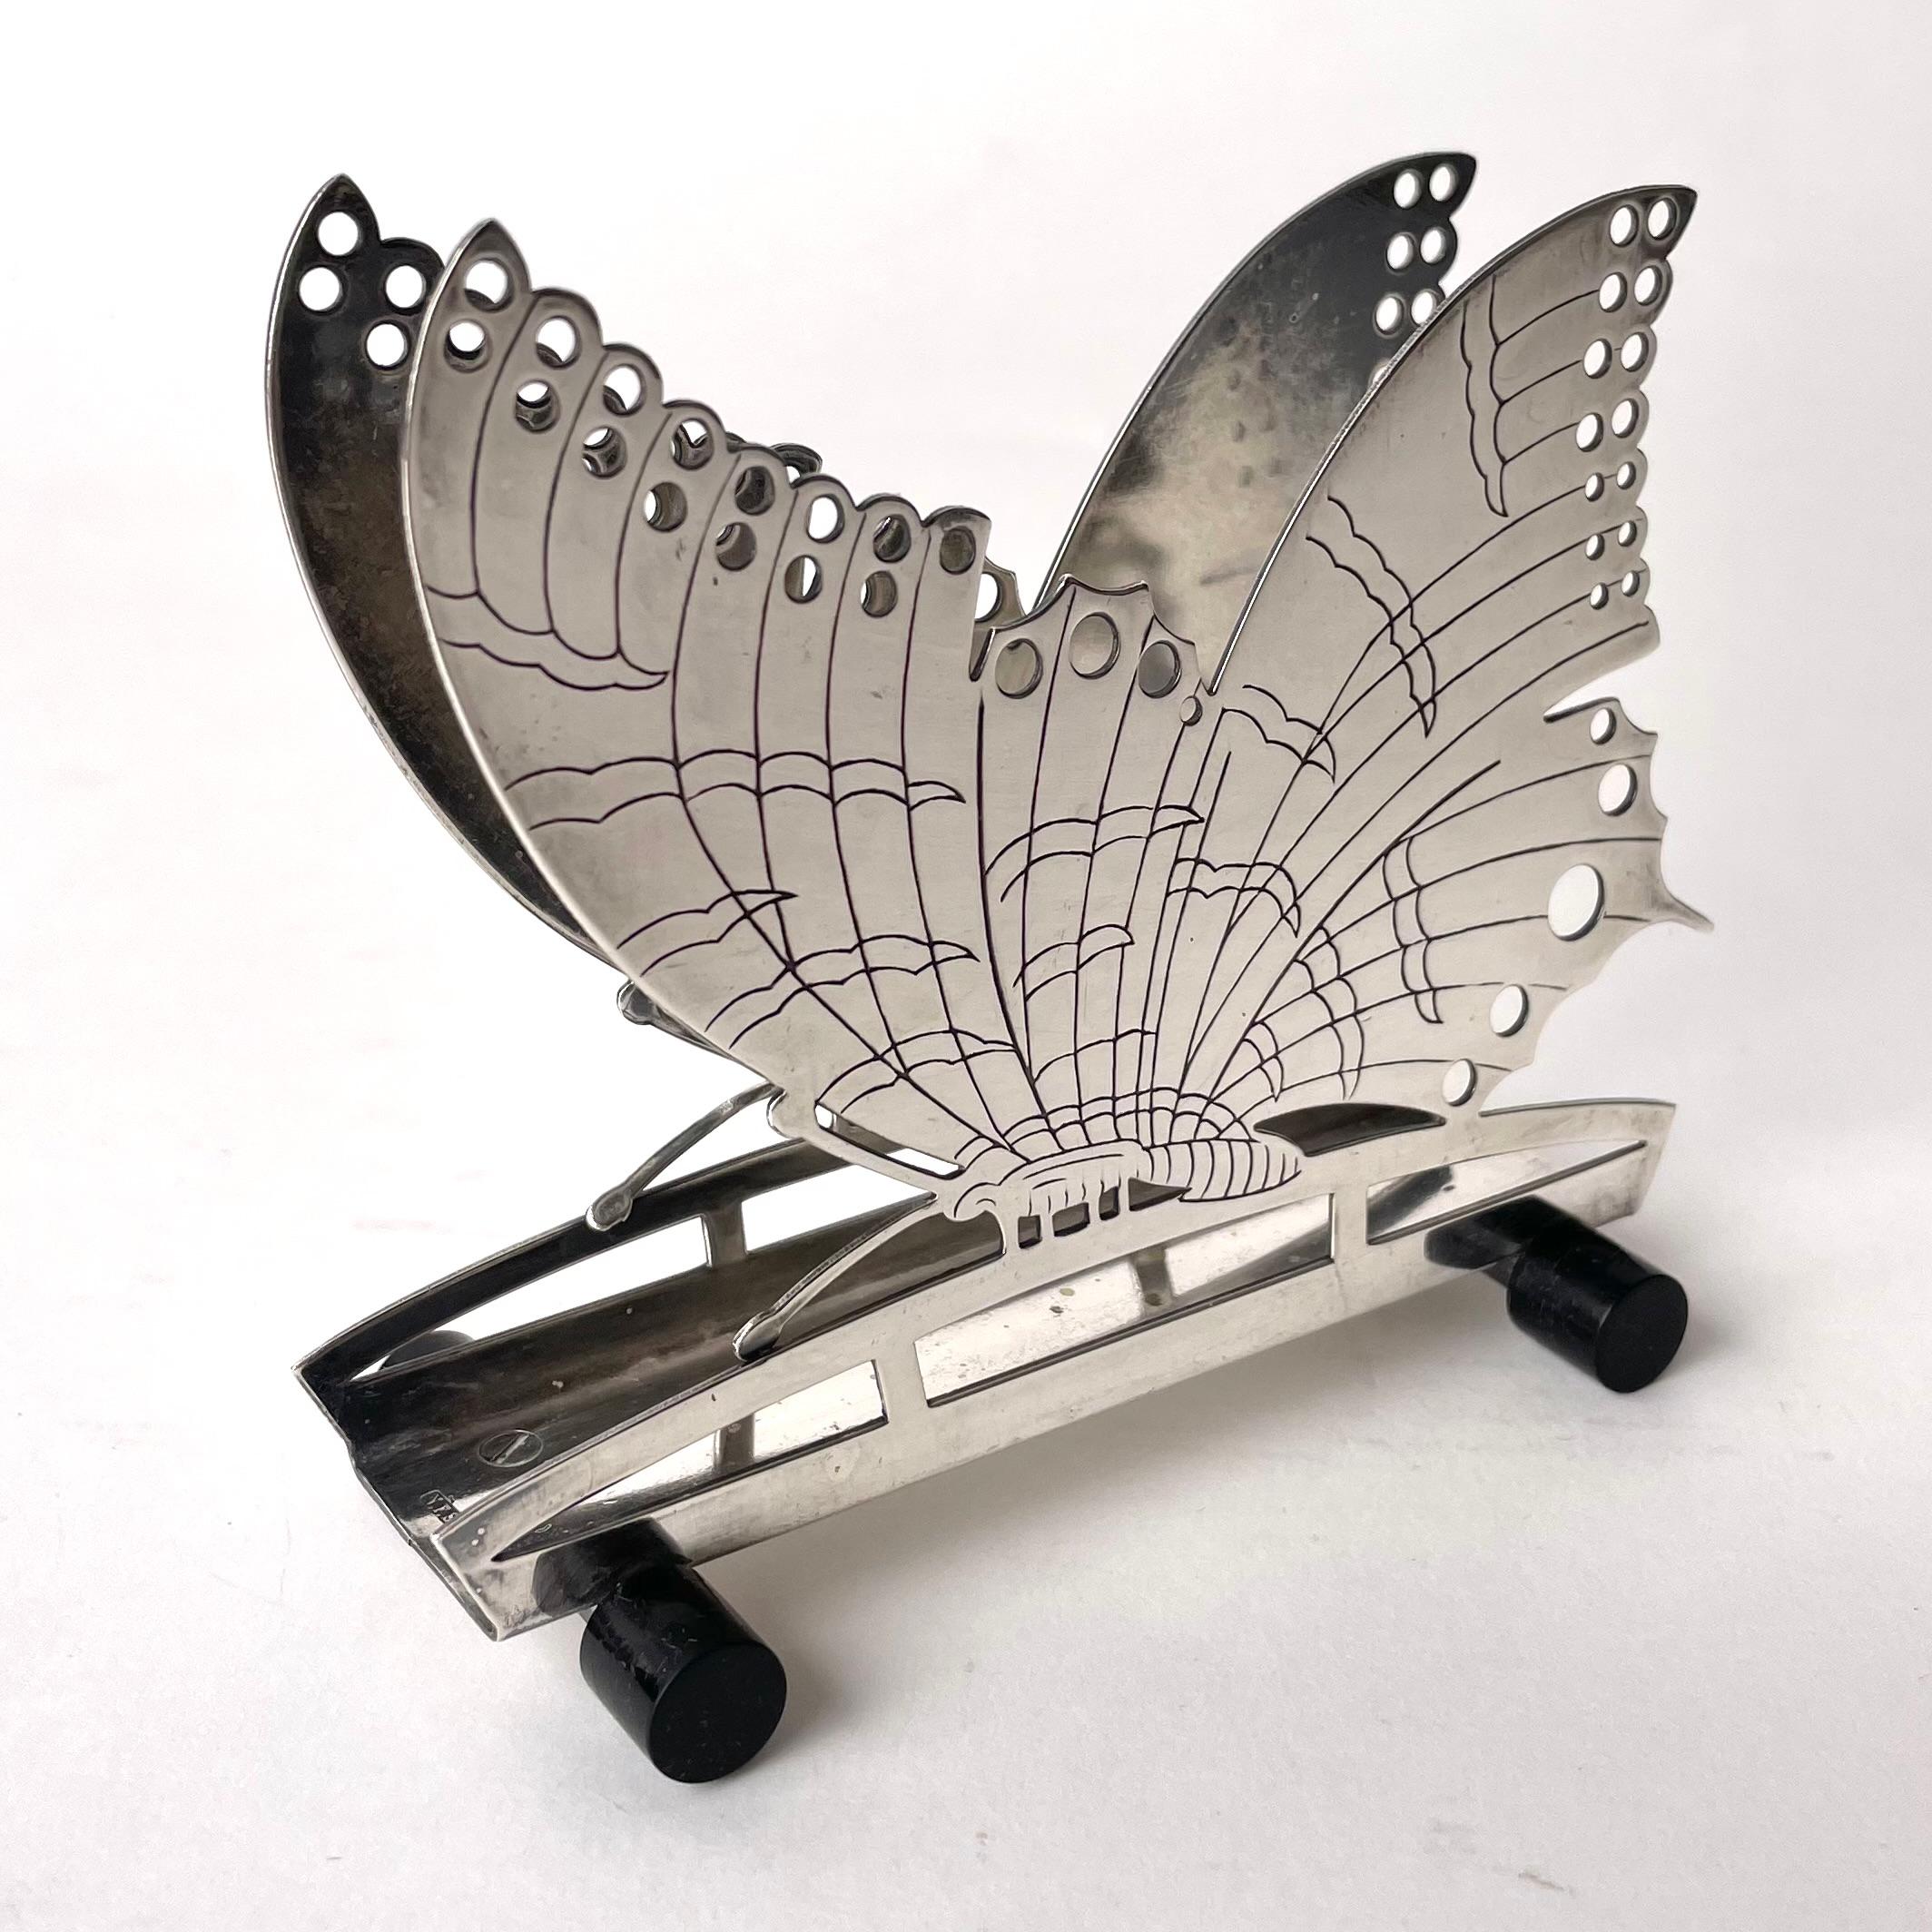 Charming Art Deco Butterfly Napkin Holder Nickel Silver and Bakelite, 1920s-1930s

This charming napkin holder is both functional and decorative. It takes the shape of a butterfly in a quite unusual pose, standing rather than in flight. The creature